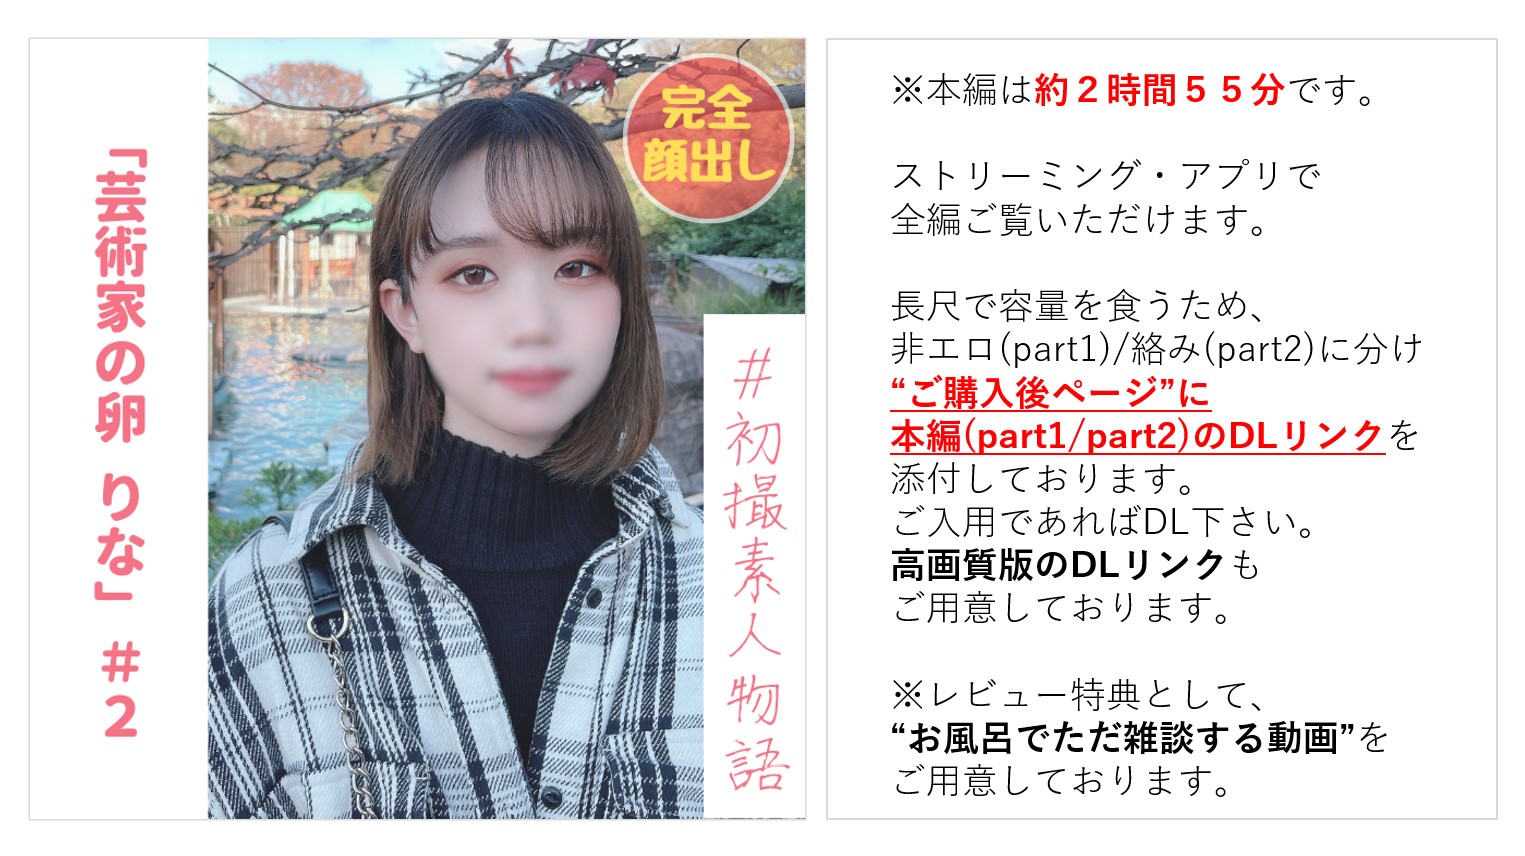 No Complete appearance Artist Egg Rina-chan 2 Zoo date Pleasure fell even though she showed resistance to raw squirrel and at the end Put it inside Main story about 3 hours Chat in the bath With benefits